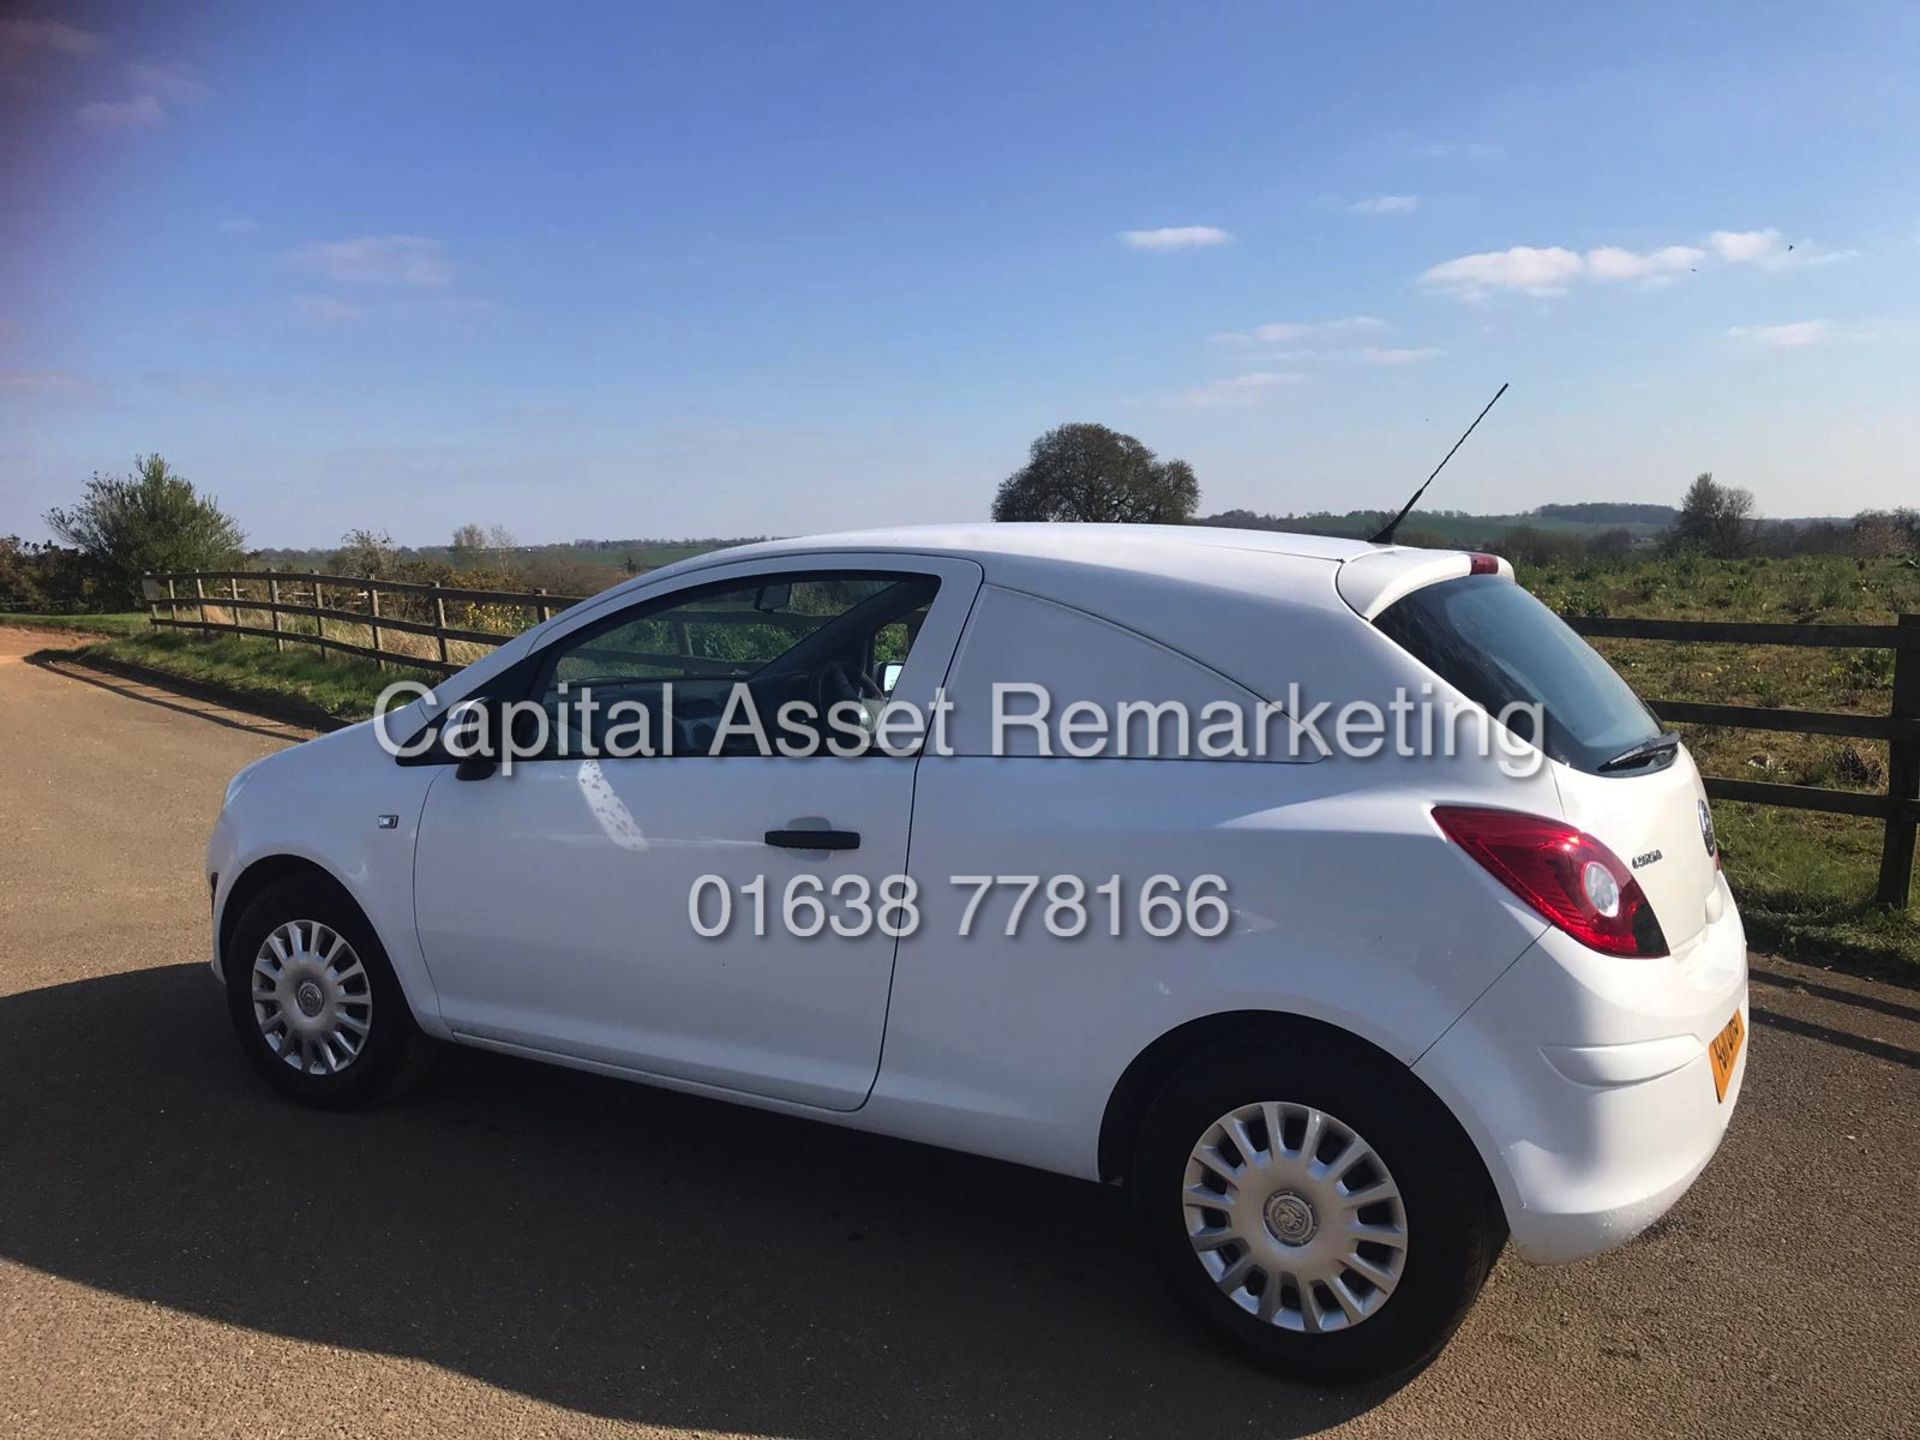 ON SALE VAUXHALL CORSA 1.3CDTI "COMMERCIAL VAN" *NO VAT ON THIS LOT - SAVE 20%) - Image 4 of 6